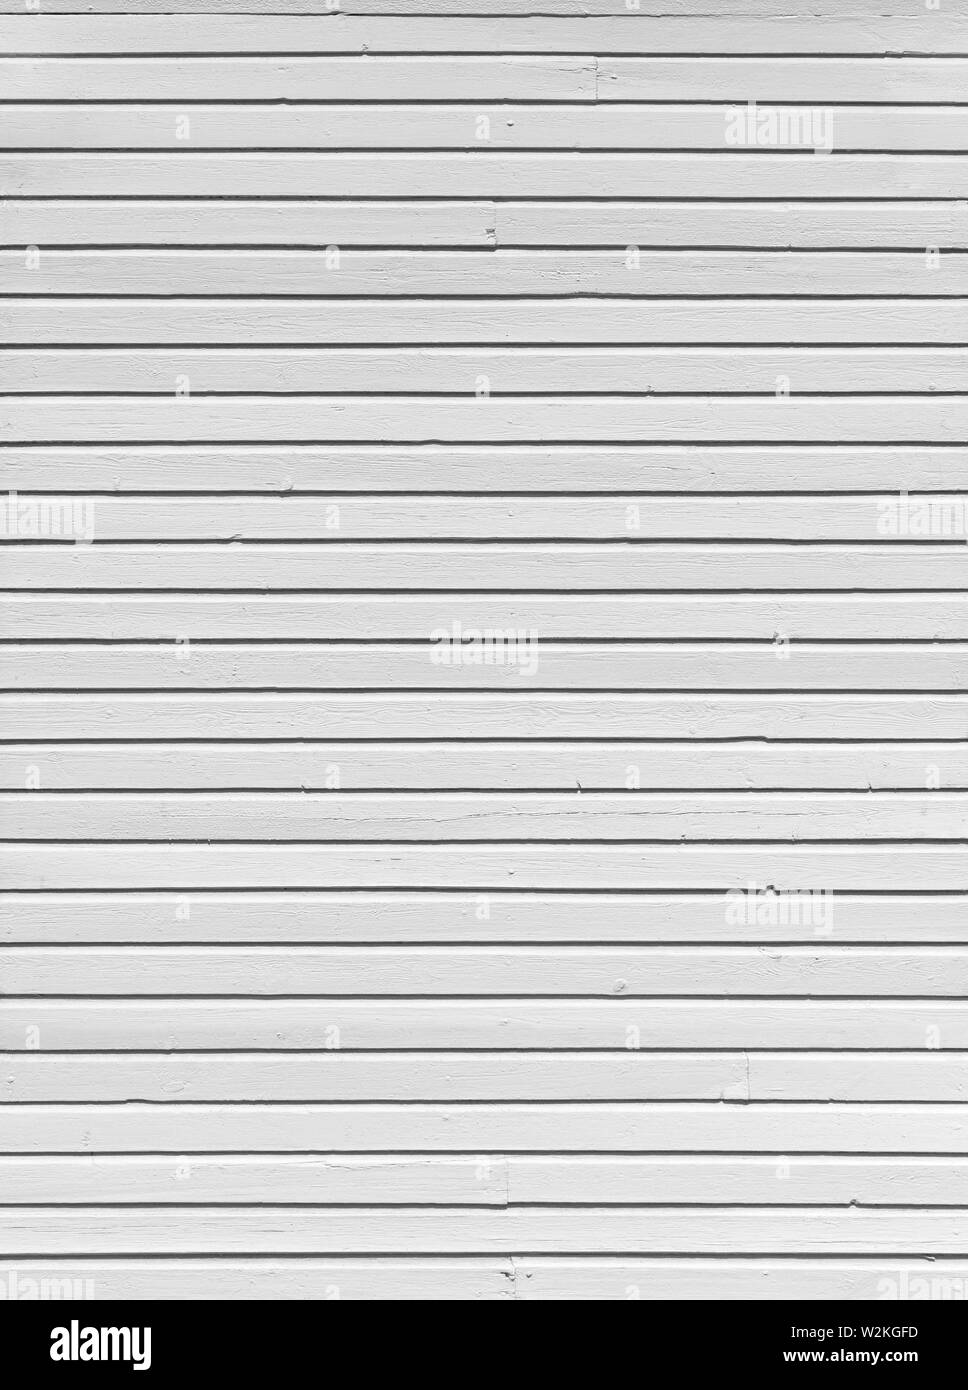 Clean wood board wall painted in white, textured background in black and white. Stock Photo